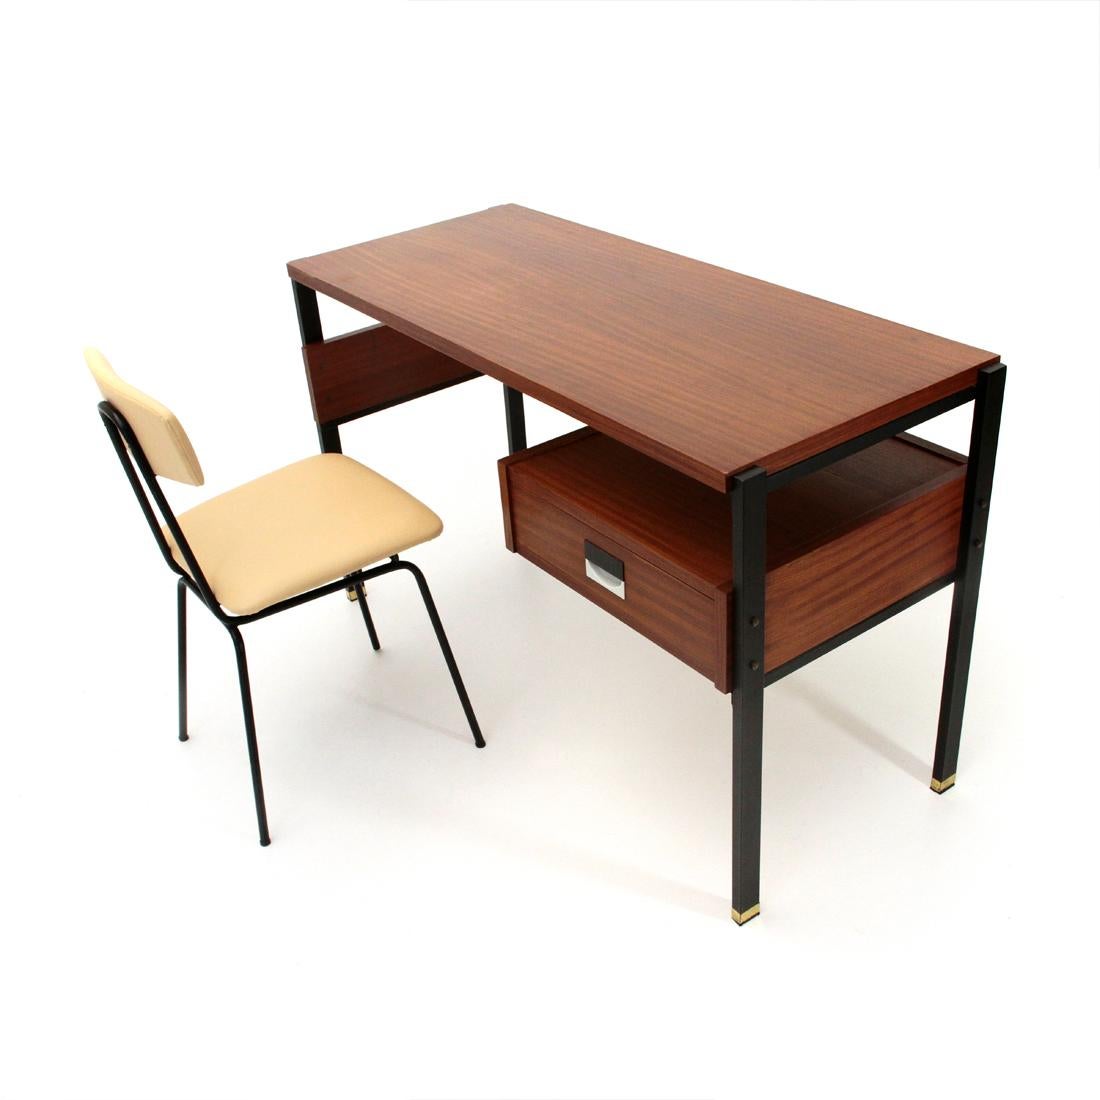 Mid-20th Century Italian Midcentury Desk and Chair by Giuseppe Brusadelli, 1950s